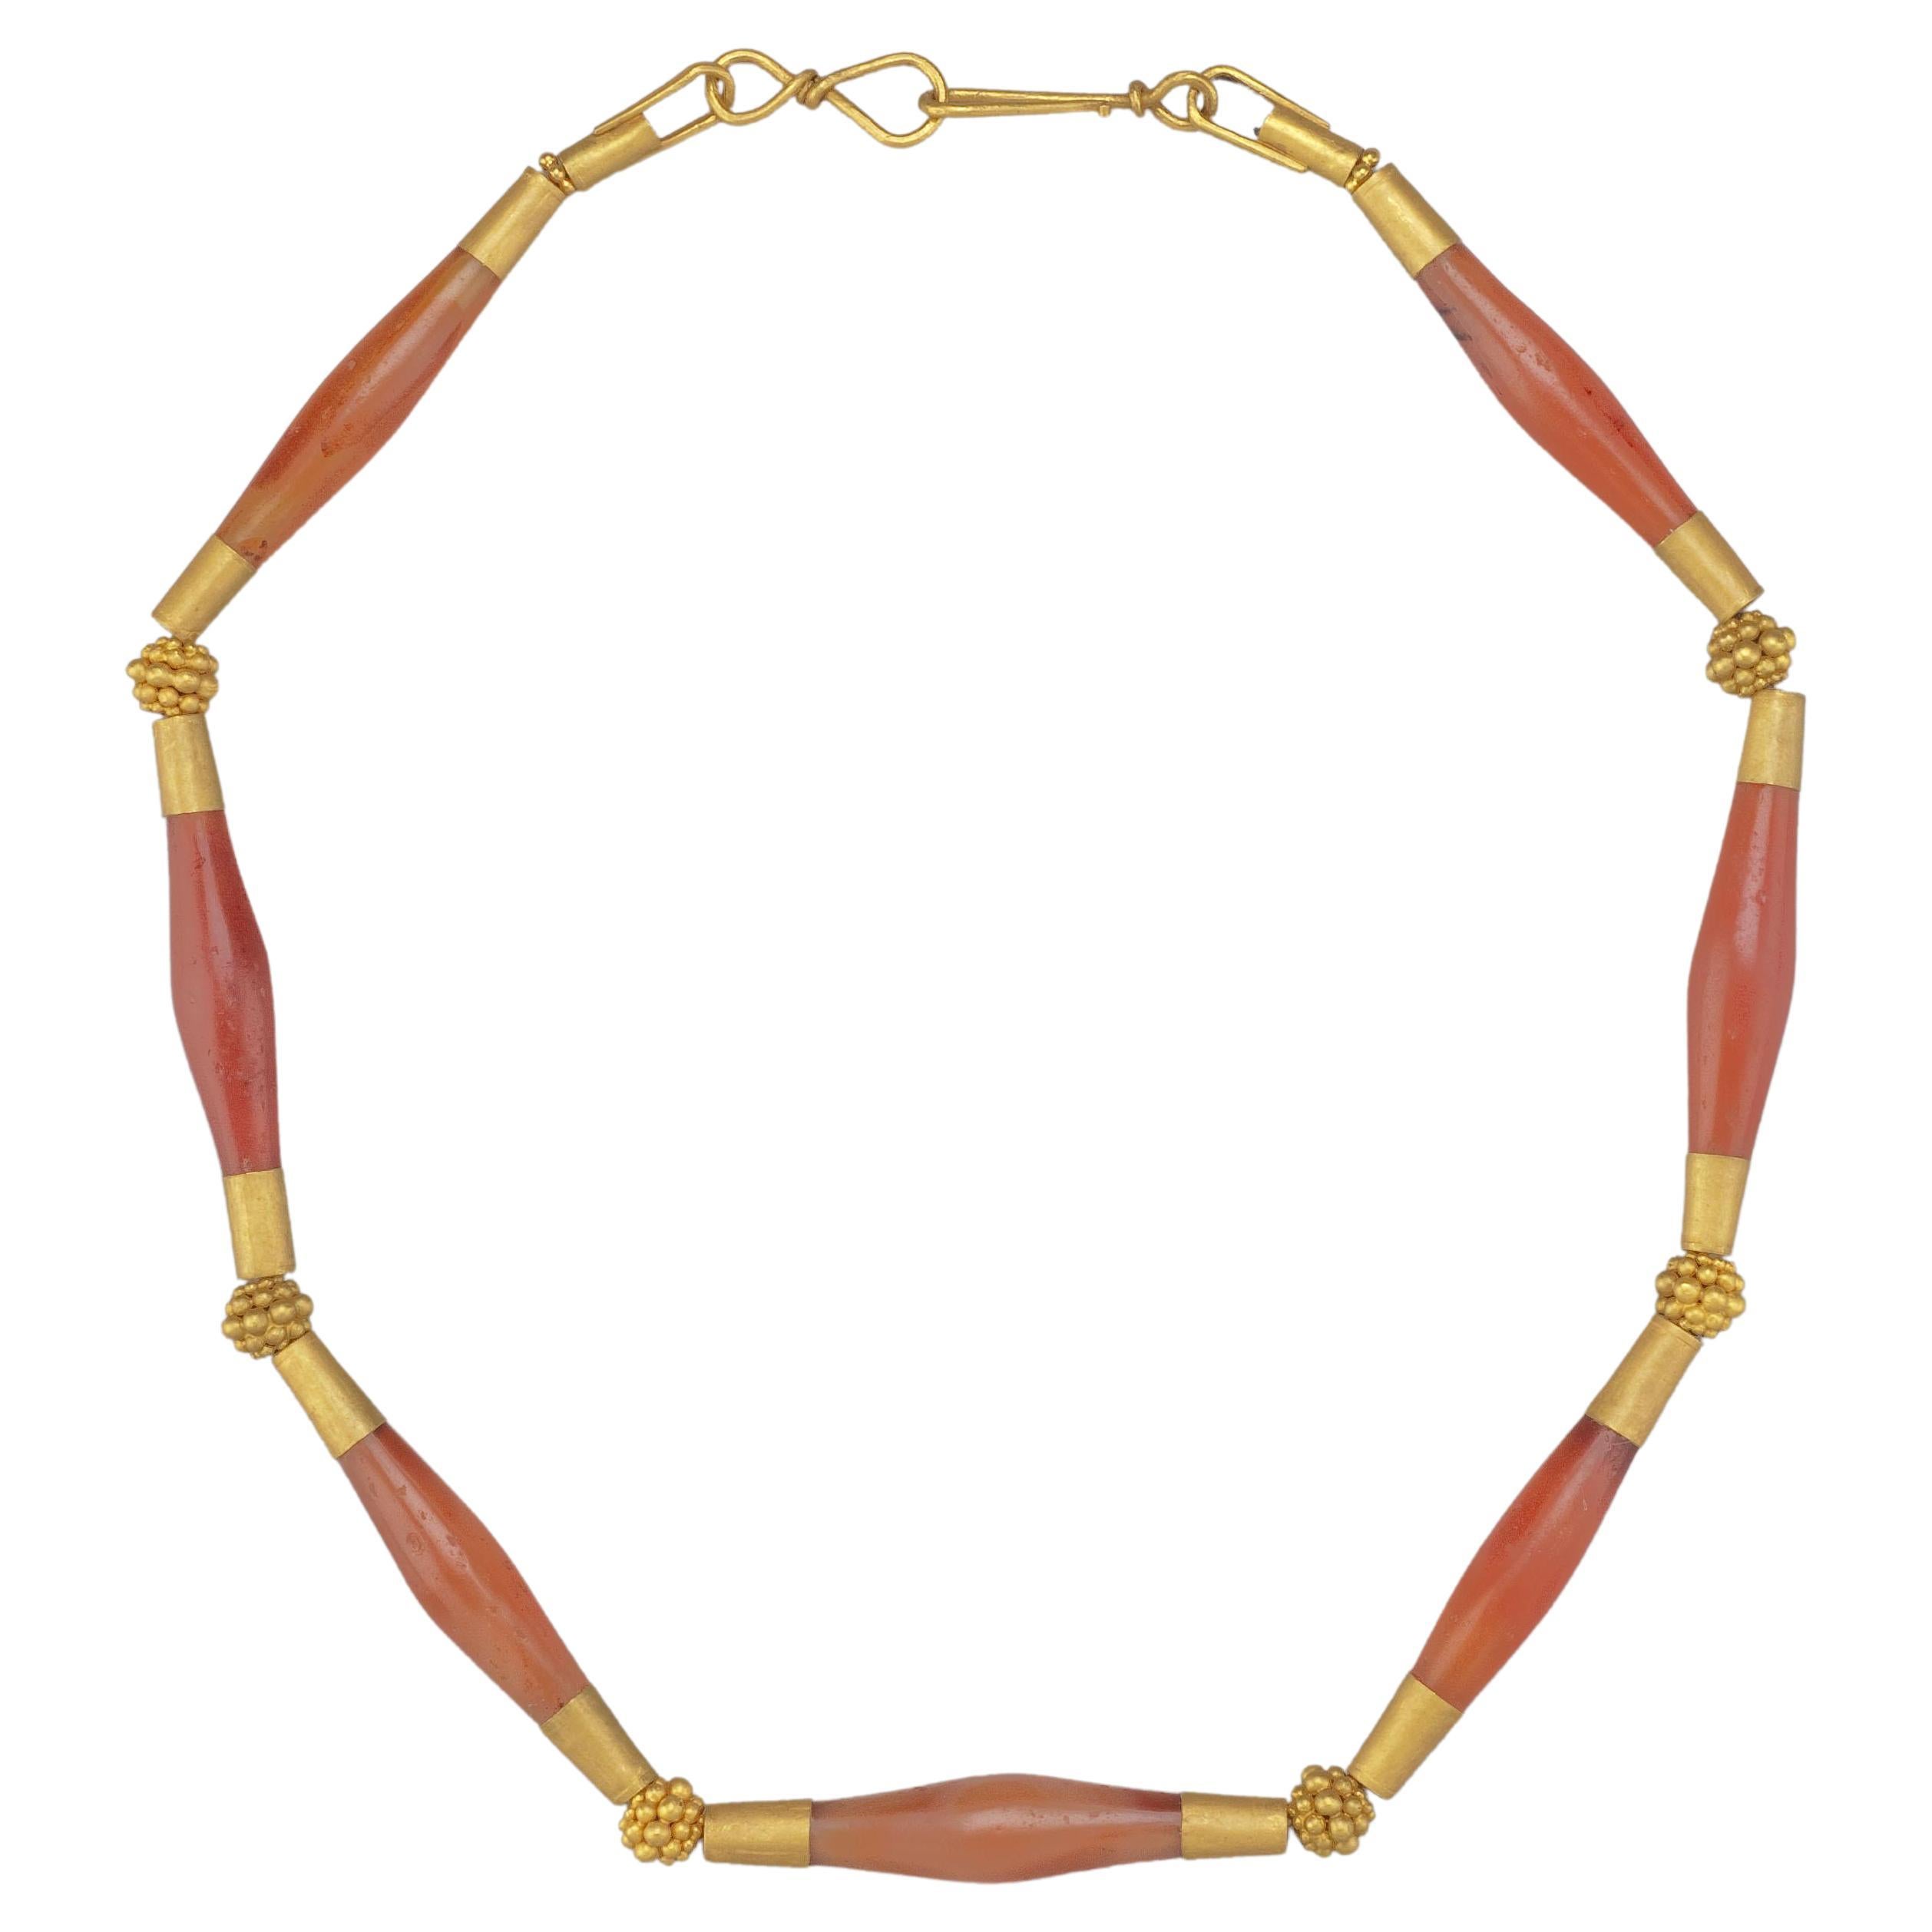 Ancient Indus Valley Carnelian Beads with Gold Caps, "Mulberry" 20k Gold Beads For Sale